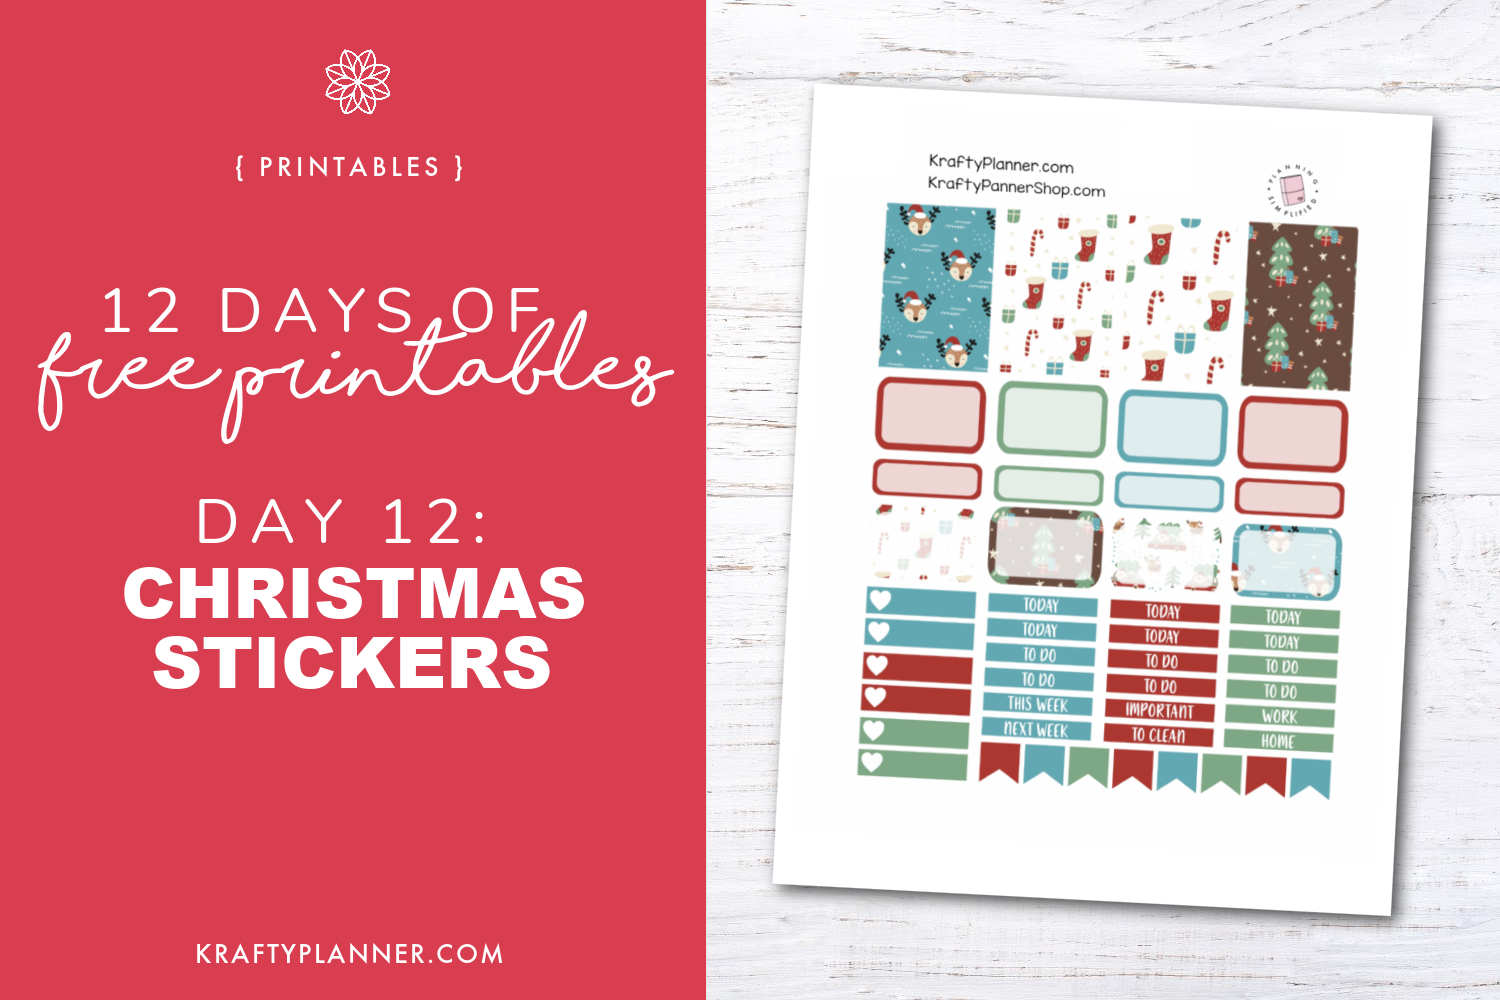 DAY 12: Christmas Stickers  {12 Days of Free Christmas Printables}